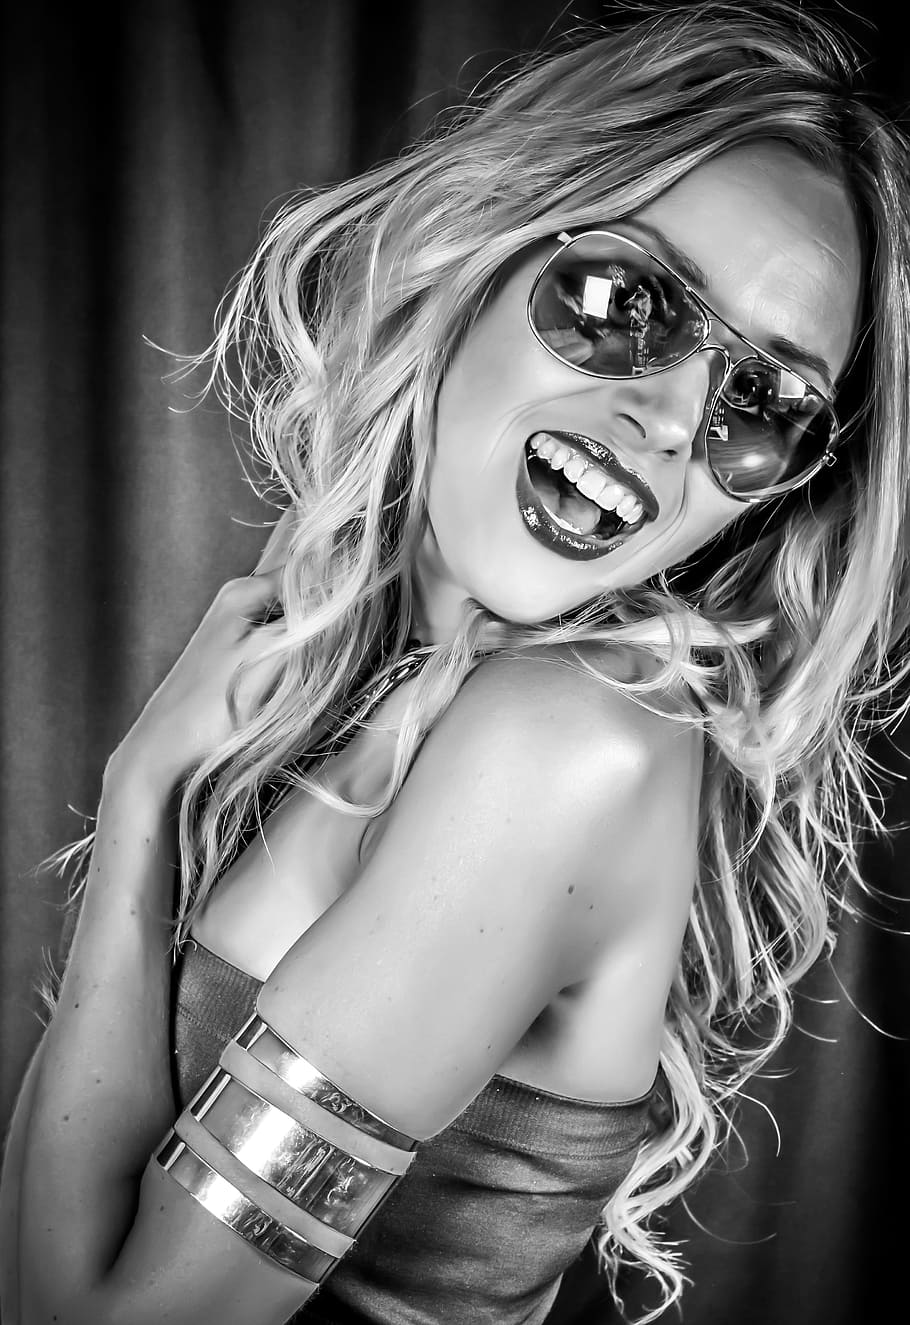 woman, wearing, aviator sunglasses, glamour, mode, sunglasses, portrait, one person, real people, looking at camera